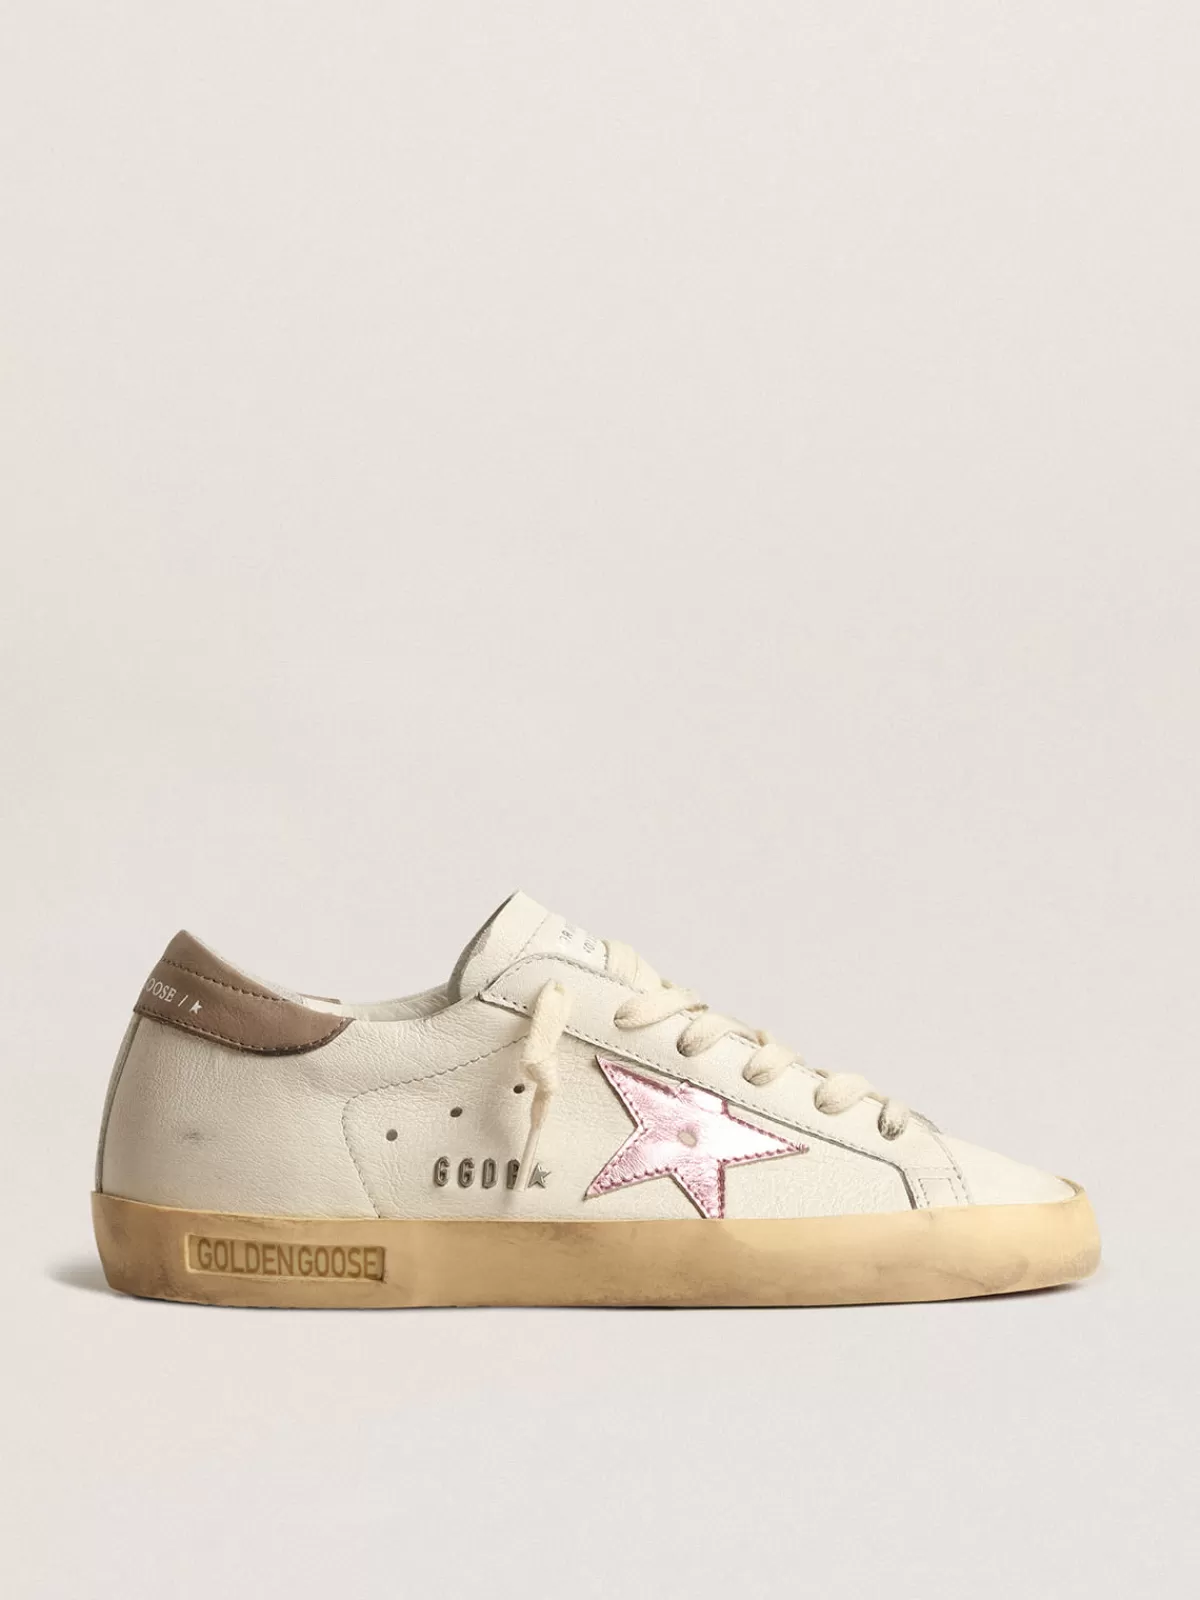 Golden Goose Super-Star in white nappa with pink metallic leather star Cheap